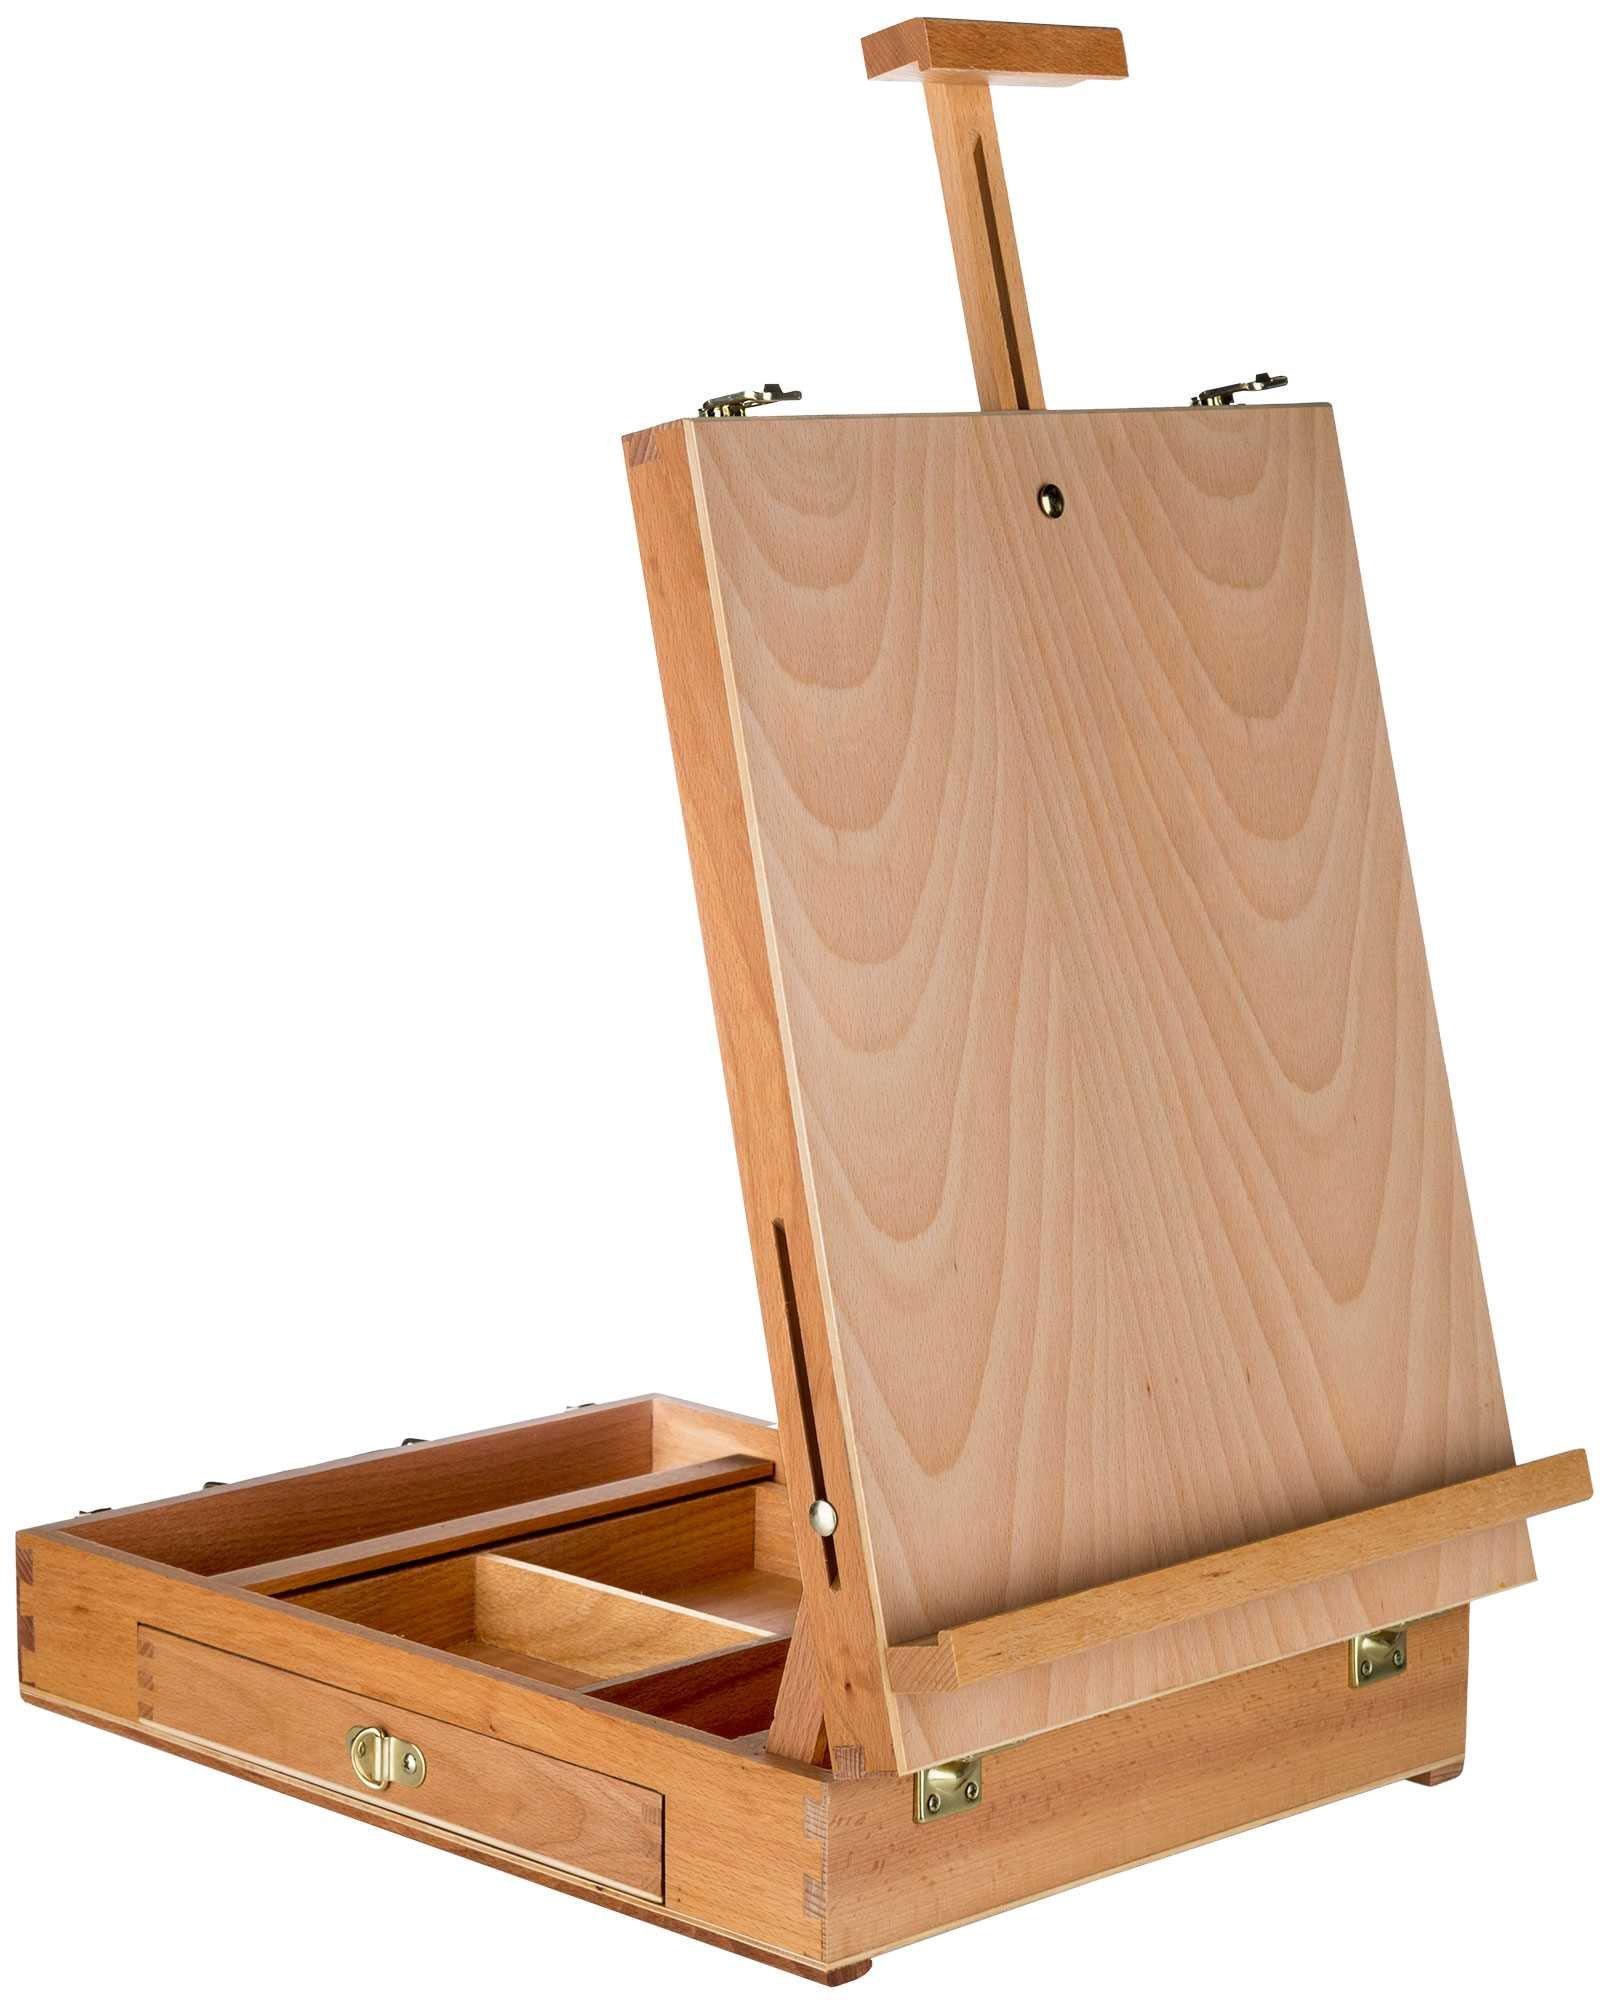 Artist French Easel Box Beechwood With Wheels & Wooden Palette Nice Gift 